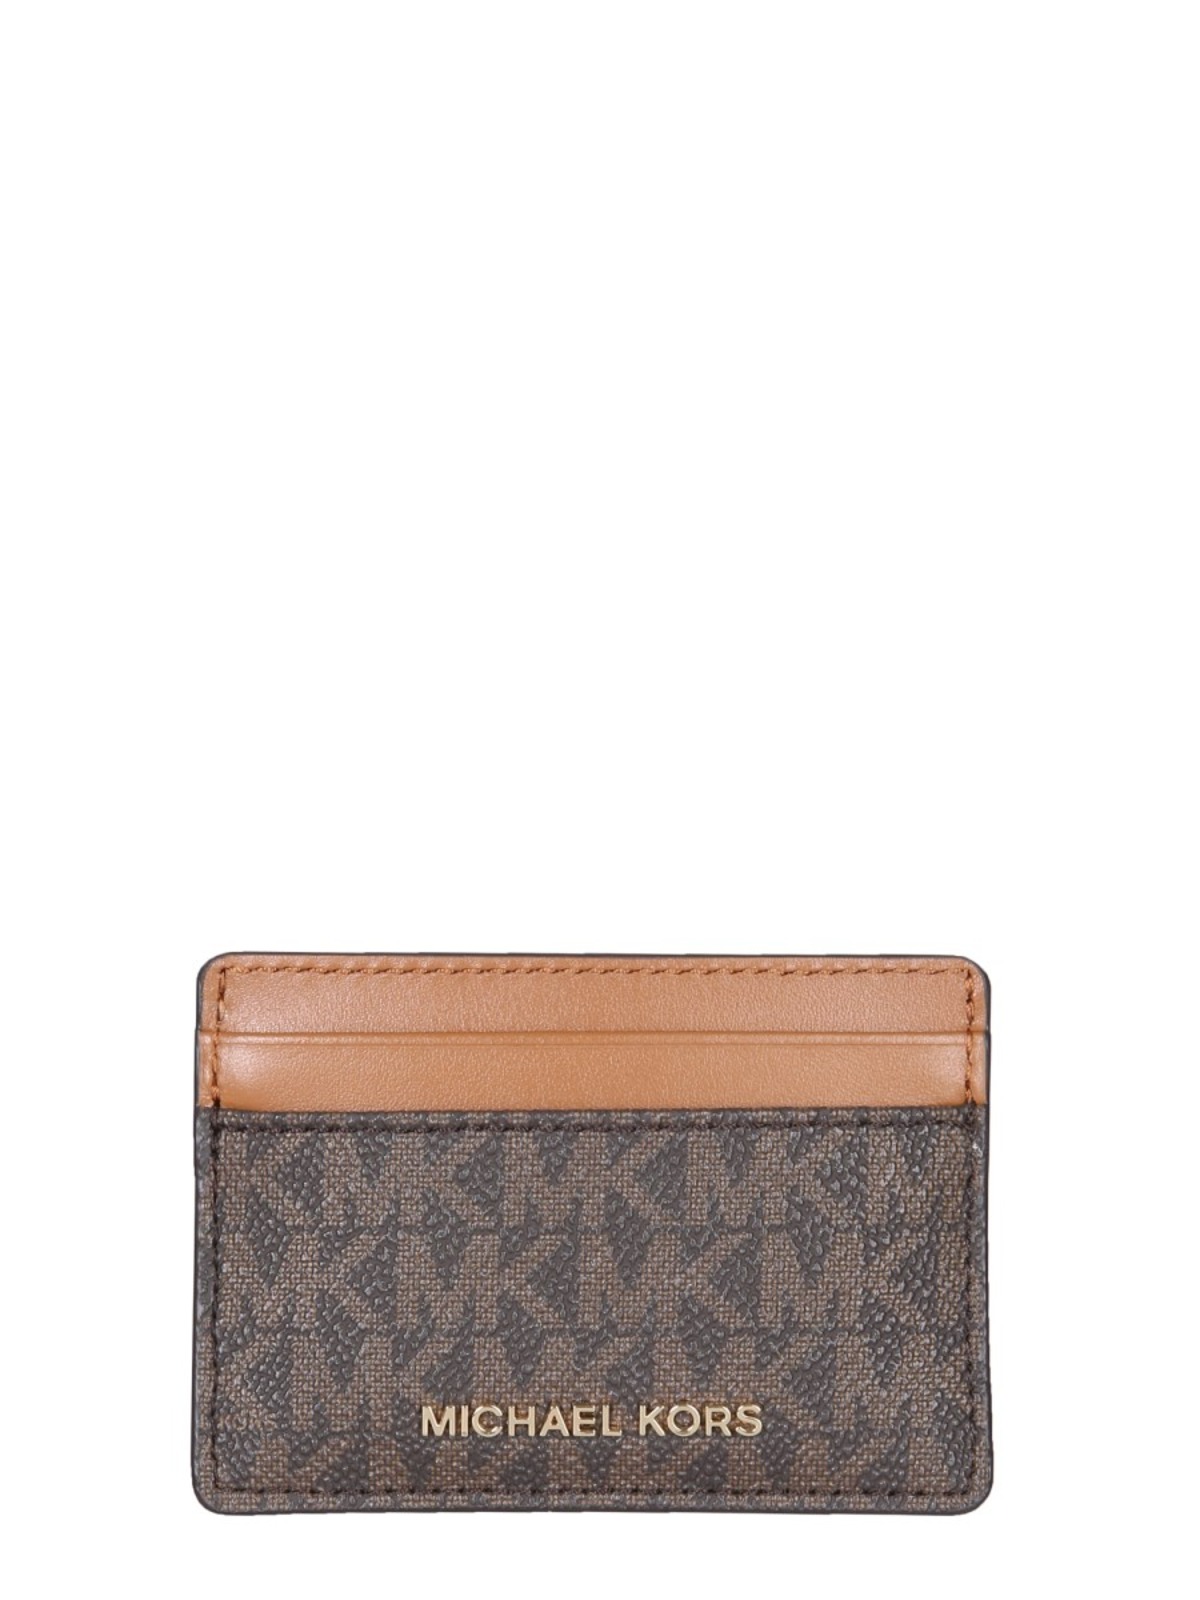 MICHAEL BY MICHAEL KORS JET SET CARD HOLDER IN LOGOED COATED CANVAS ...